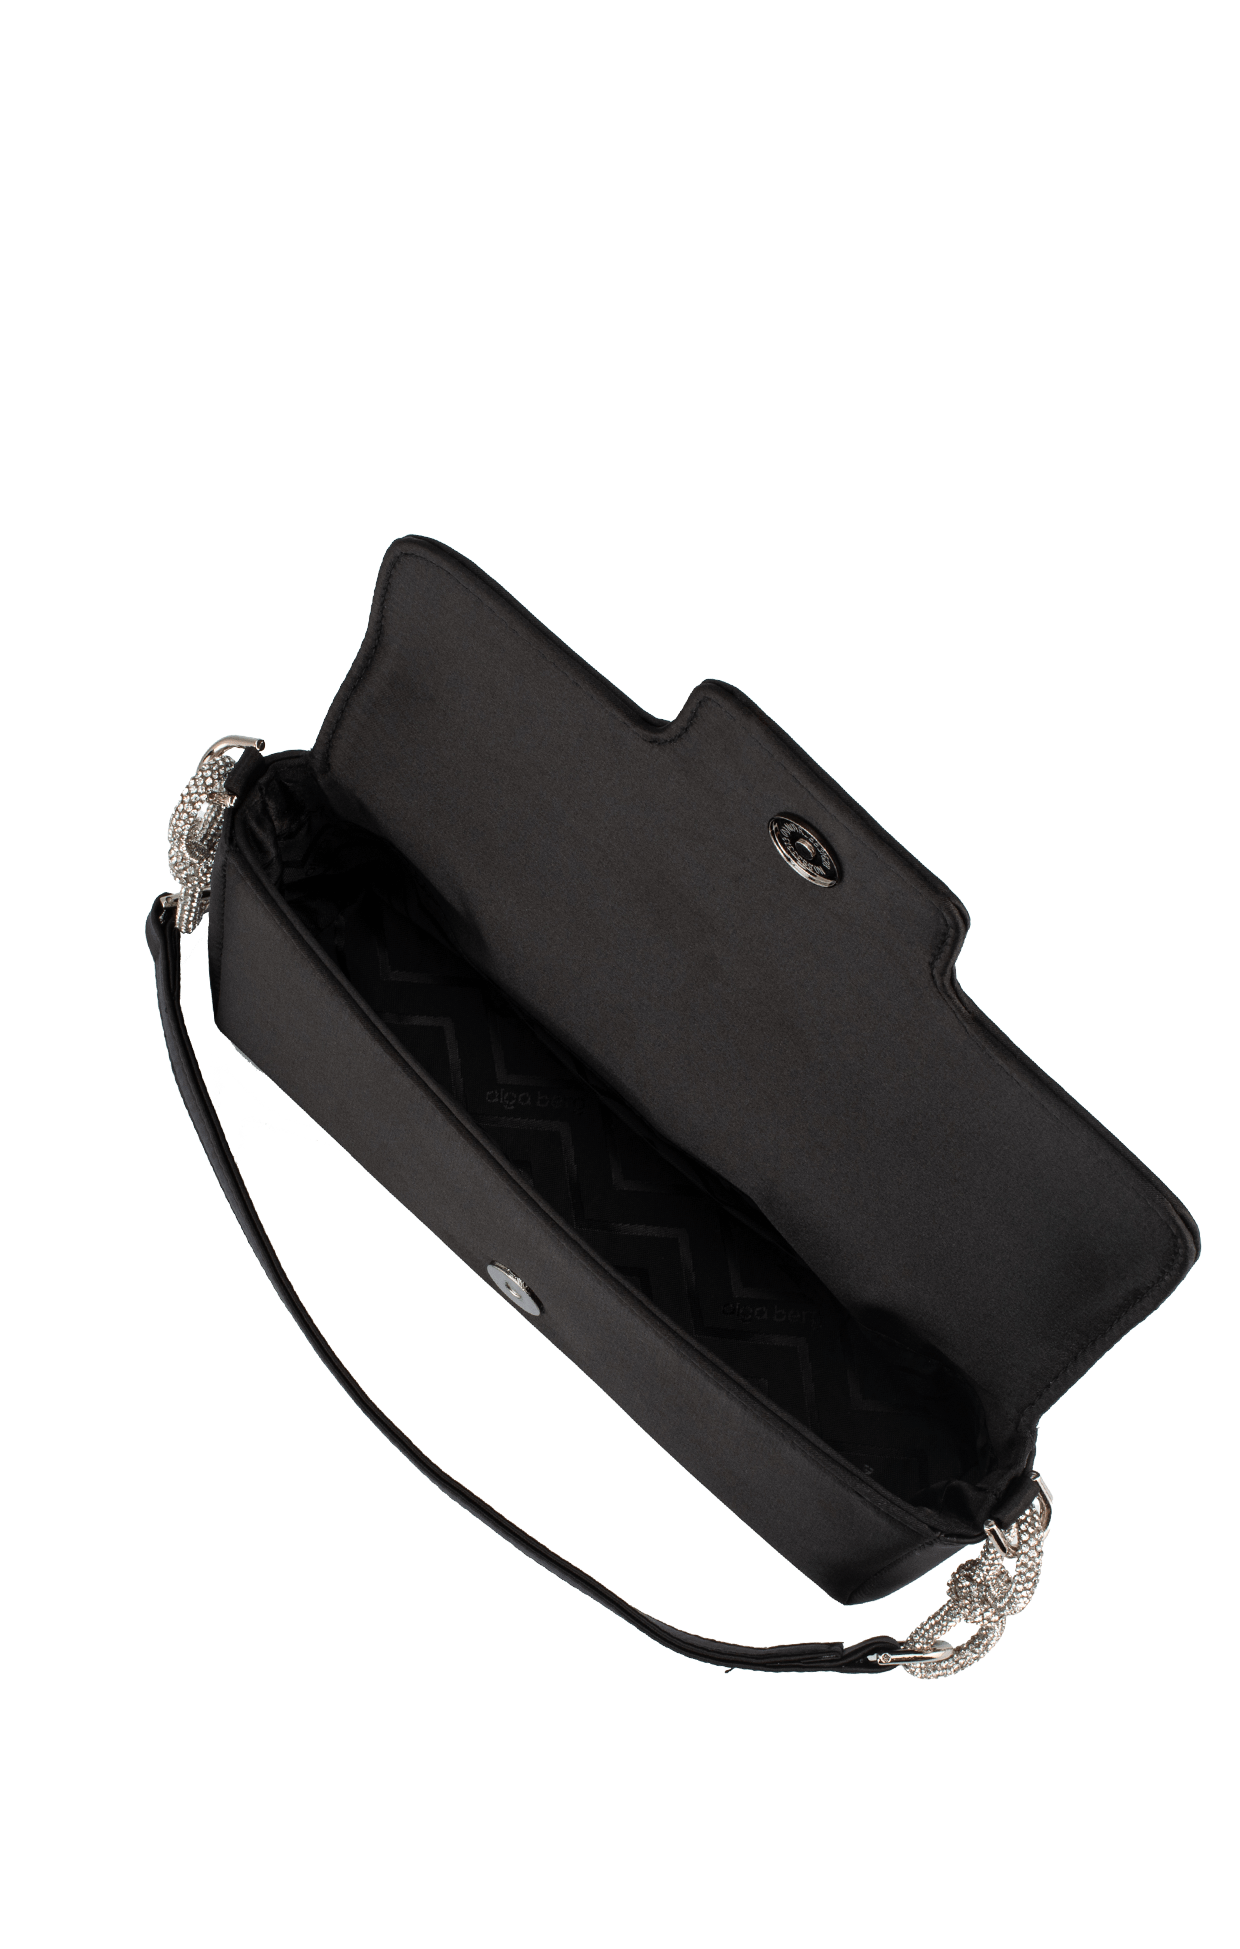 Multi Occasion OS / BLACK CALISSA CRYSTAL BOW BAG IN BLACK